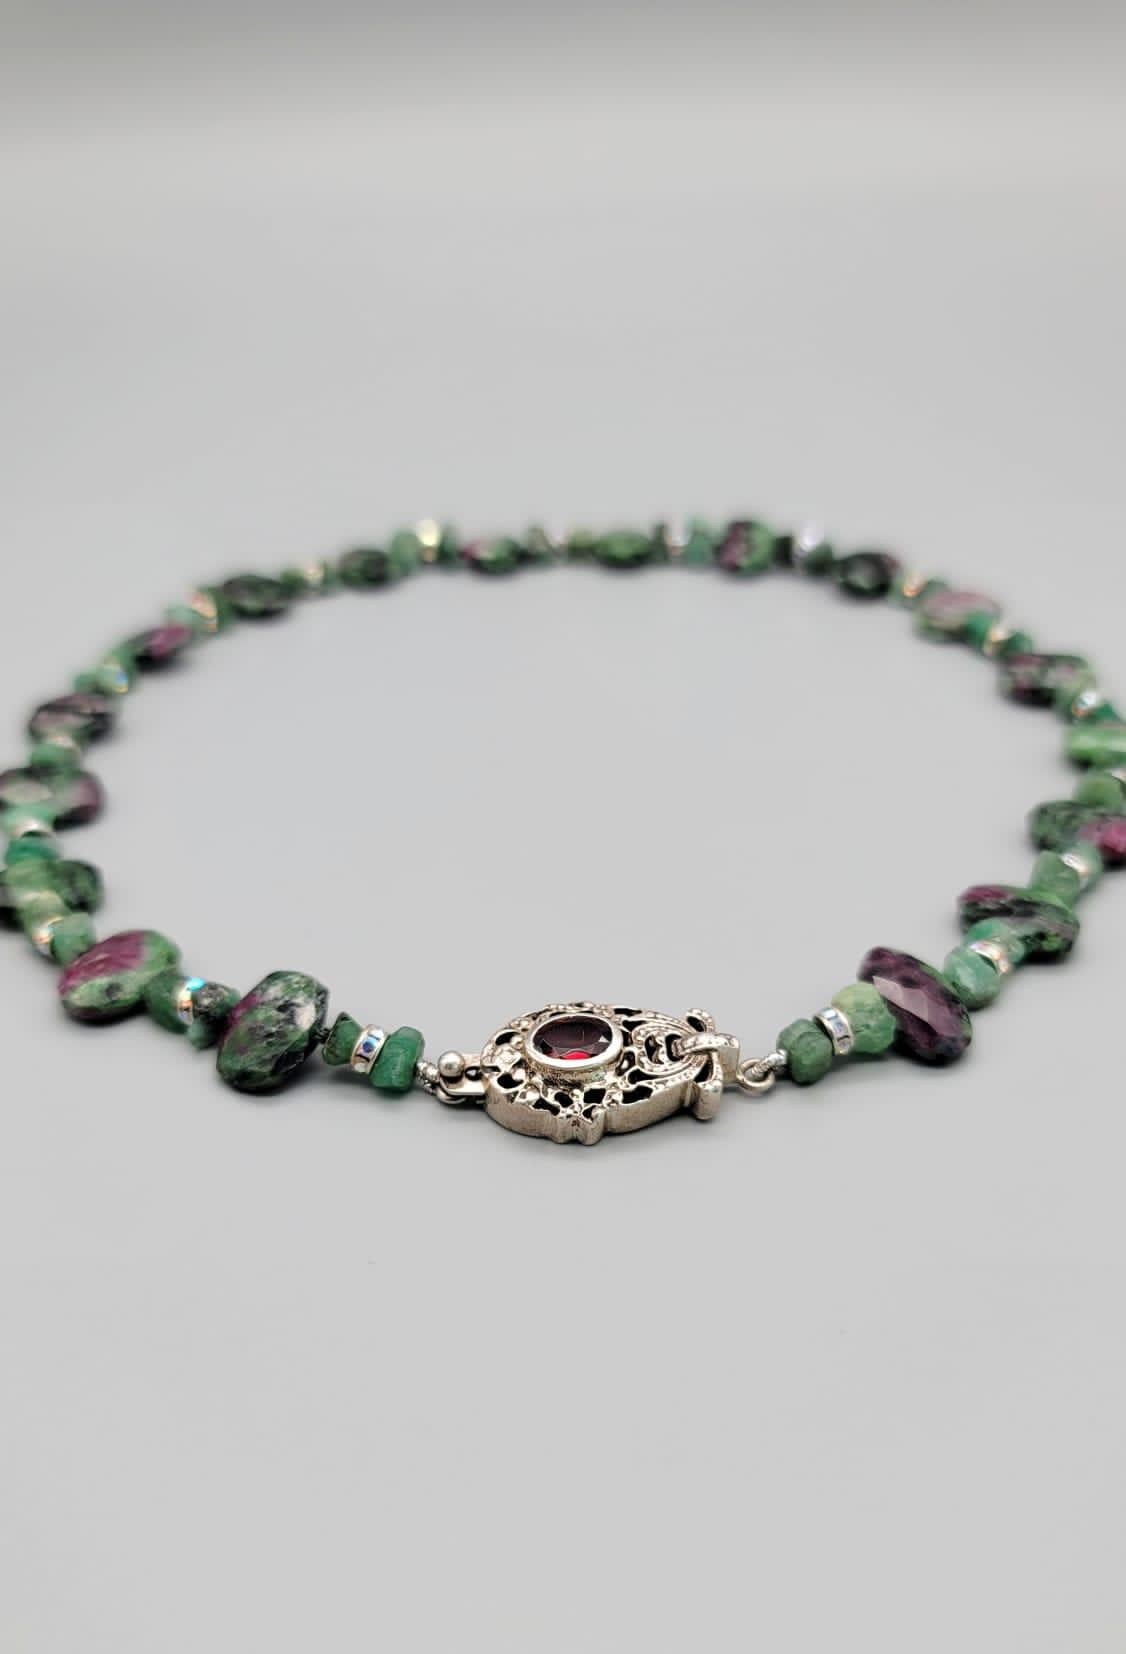 Women's A.Jeschel Ruby in Zoisite and Emerald necklace.